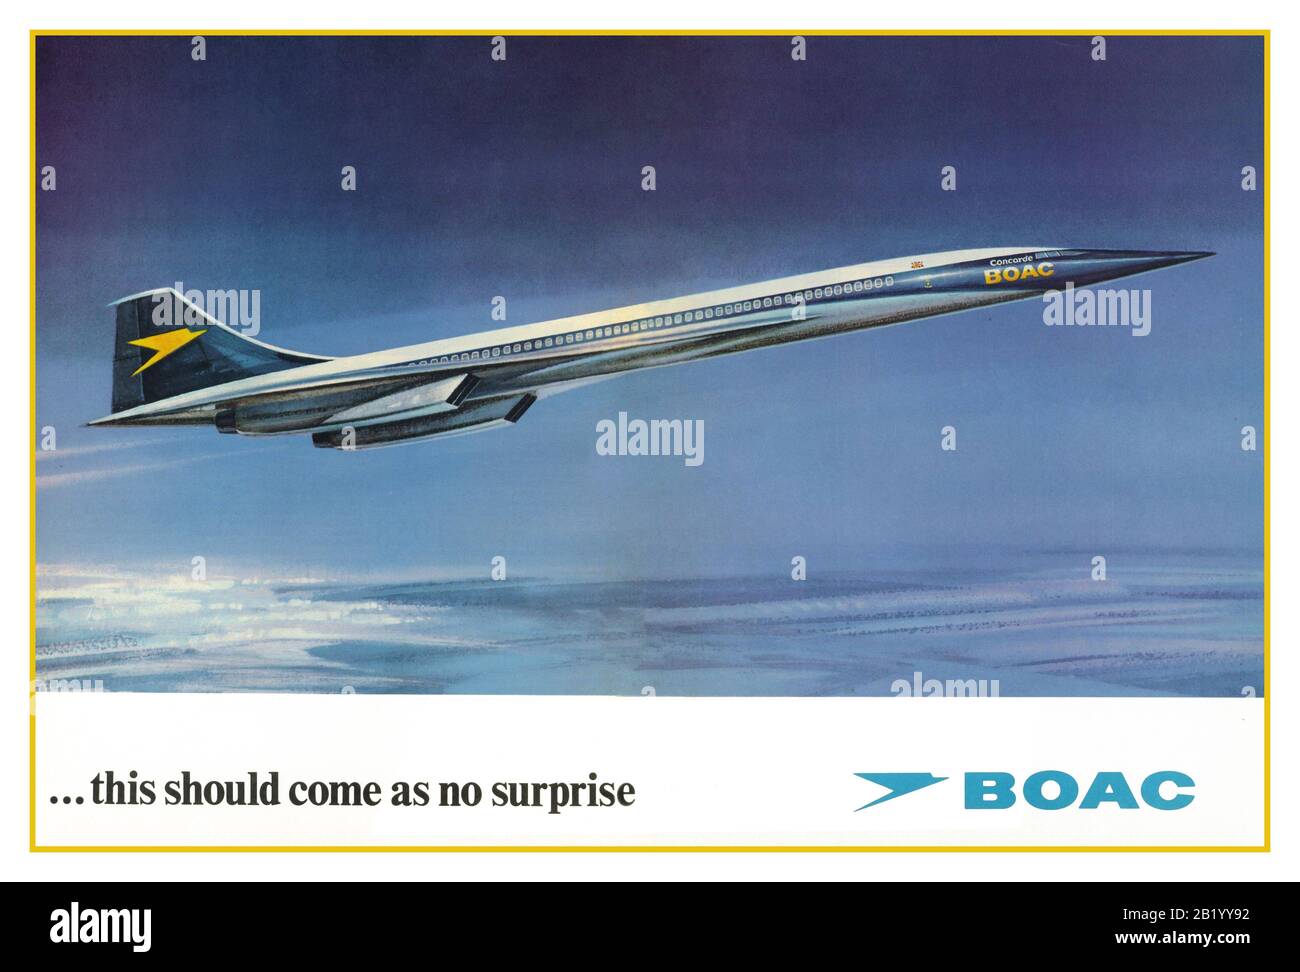 CONCORDE BOAC 1970's Advertisement in historic BOAC livery DPS advertisement poster BOAC merged with BEA in 1974 and the first British Concorde flew under the new British Airways livery in 1975. 'This should come as no surprise' Stock Photo